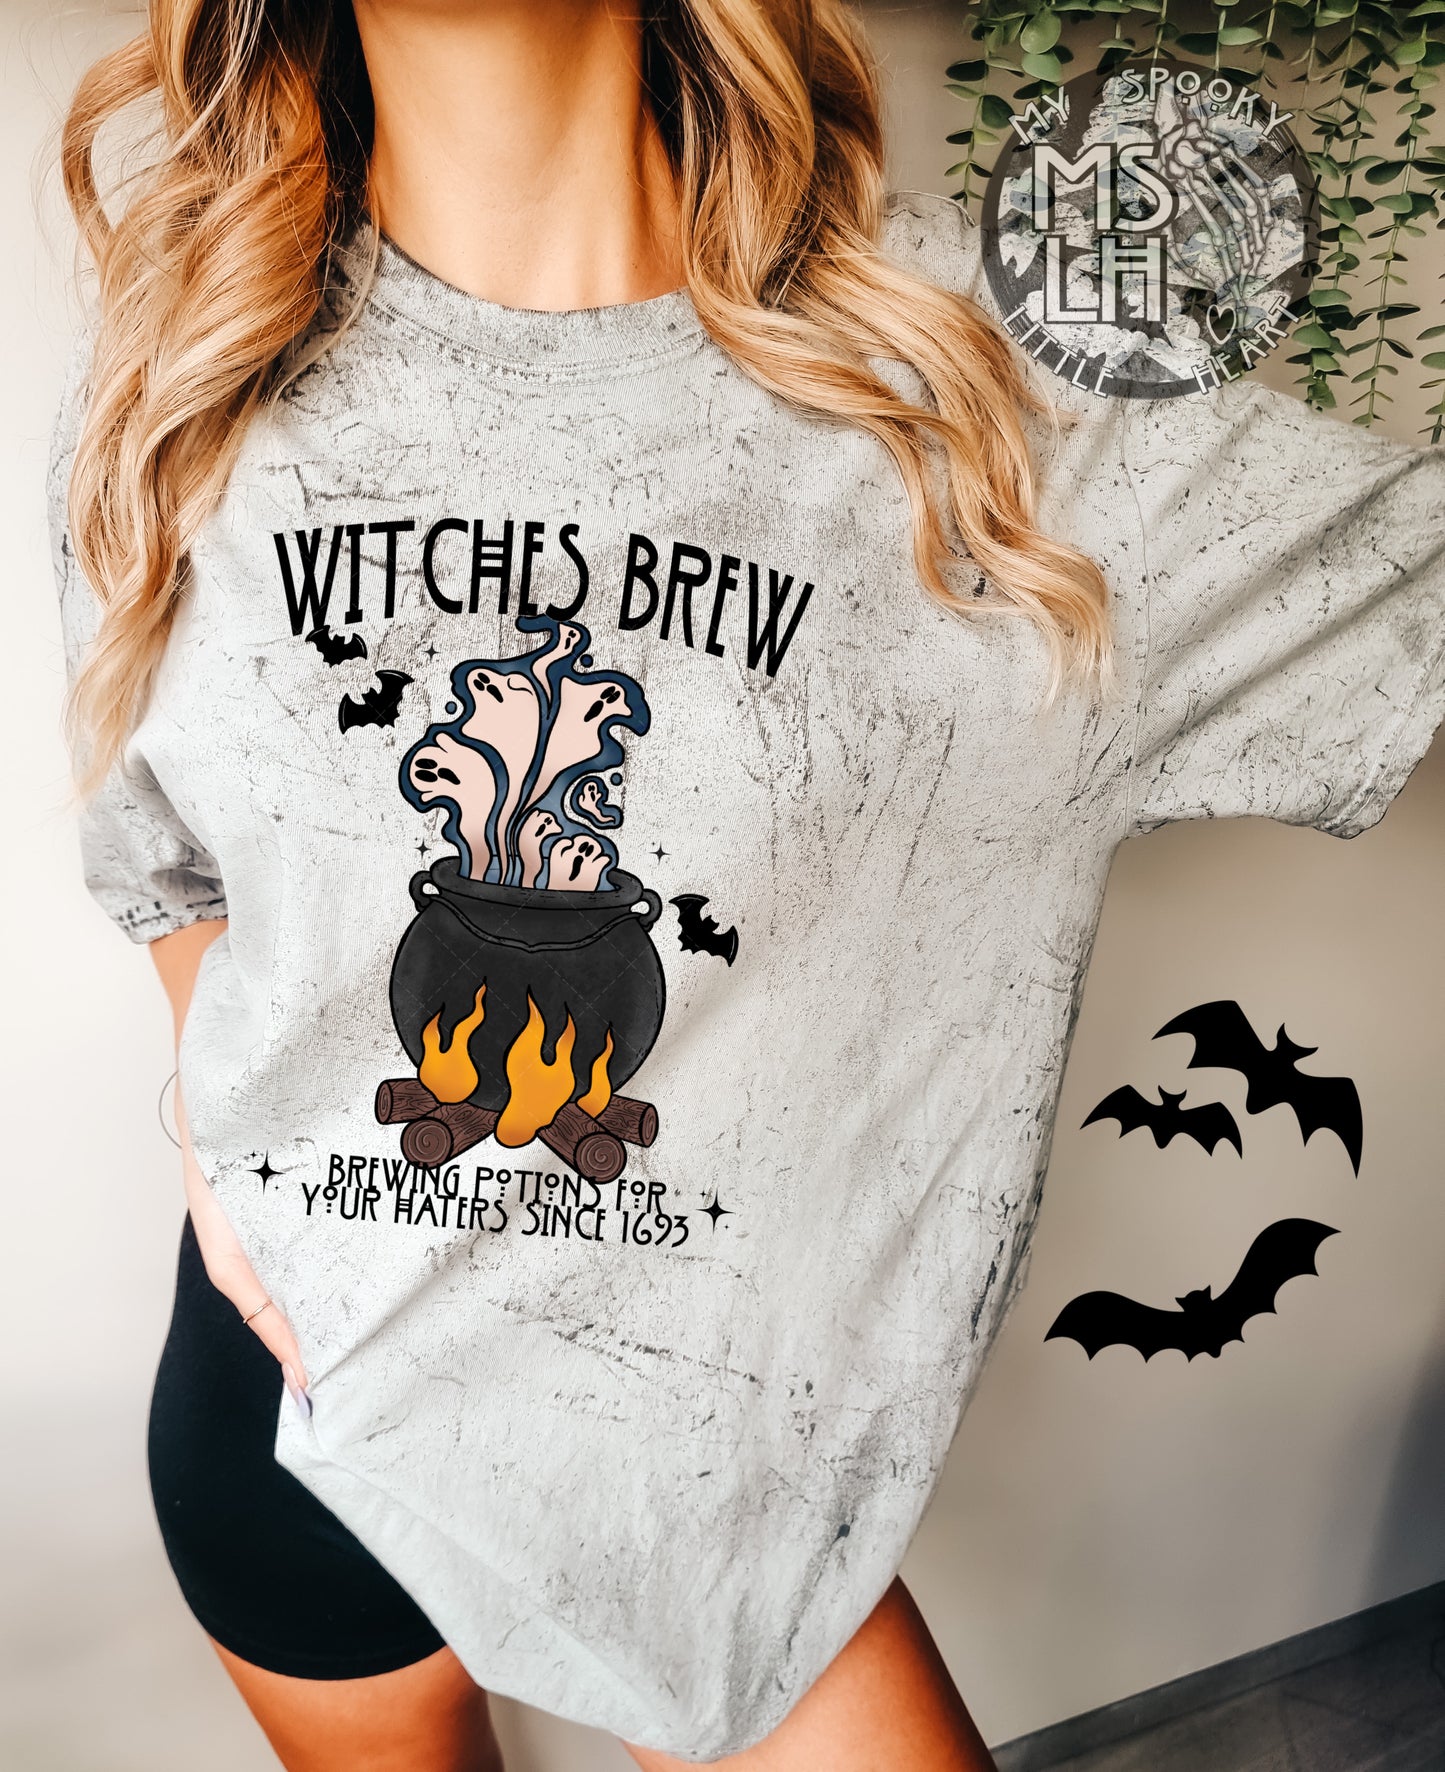 Witches Brew, Brewing Potions for your haters since 1693 Dyed T-Shirt